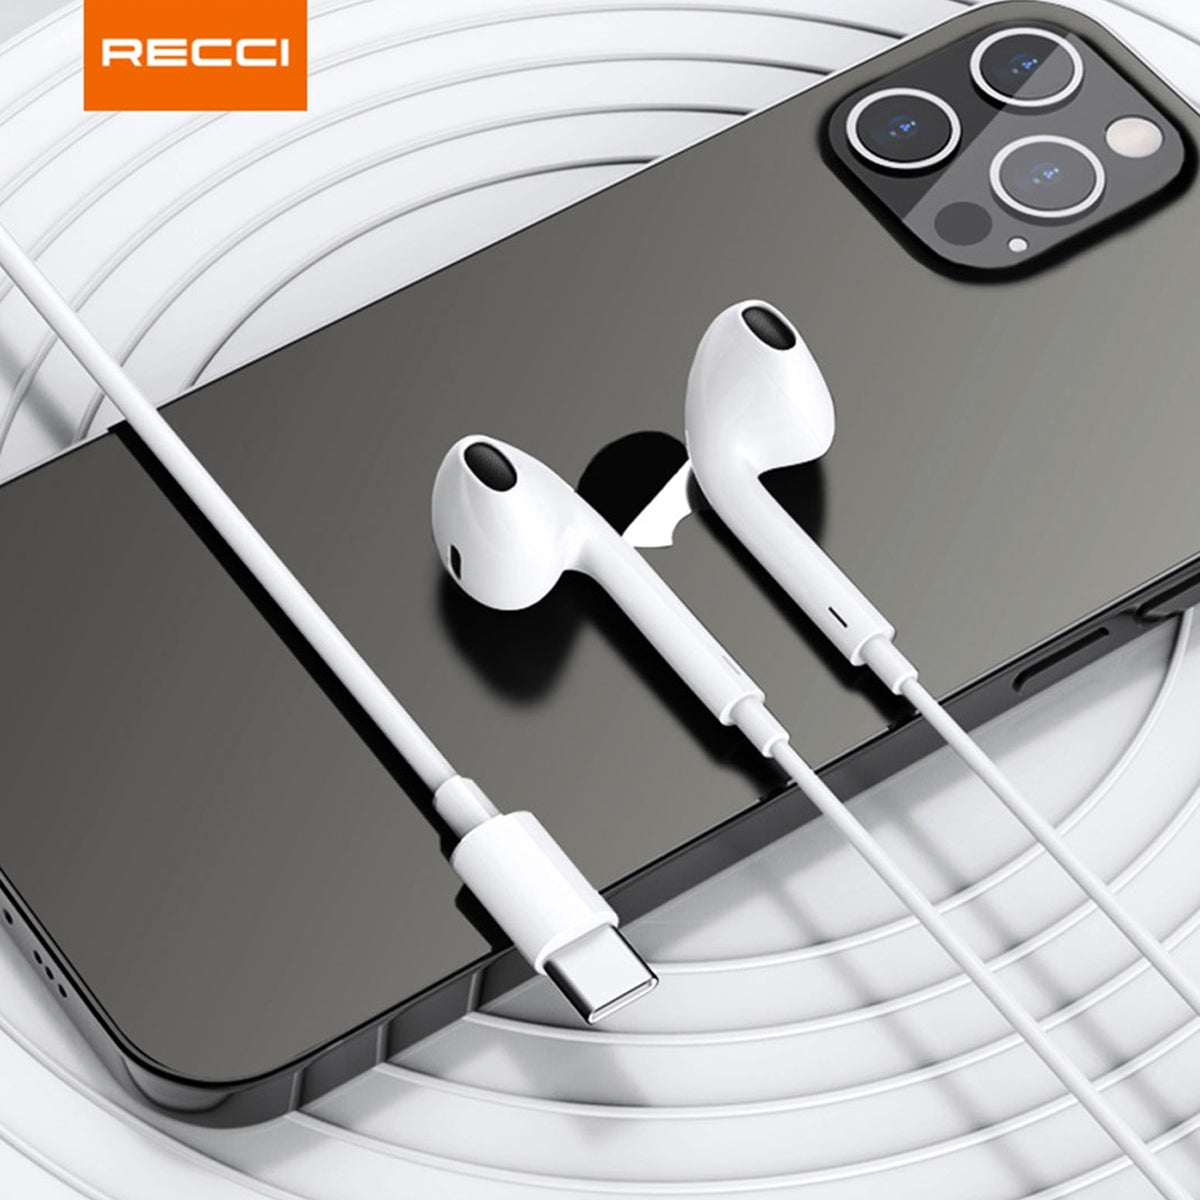 Shop and buy Recci REP-L27 Type-C Wired Earphone with Microphone HD Sound Quality Shocked Bass Effect| Casefactorie® online with great deals and sales prices with fast and safe shipping. Casefactorie is the largest Singapore official authorised retailer for the largest collection of mobile premium accessories.